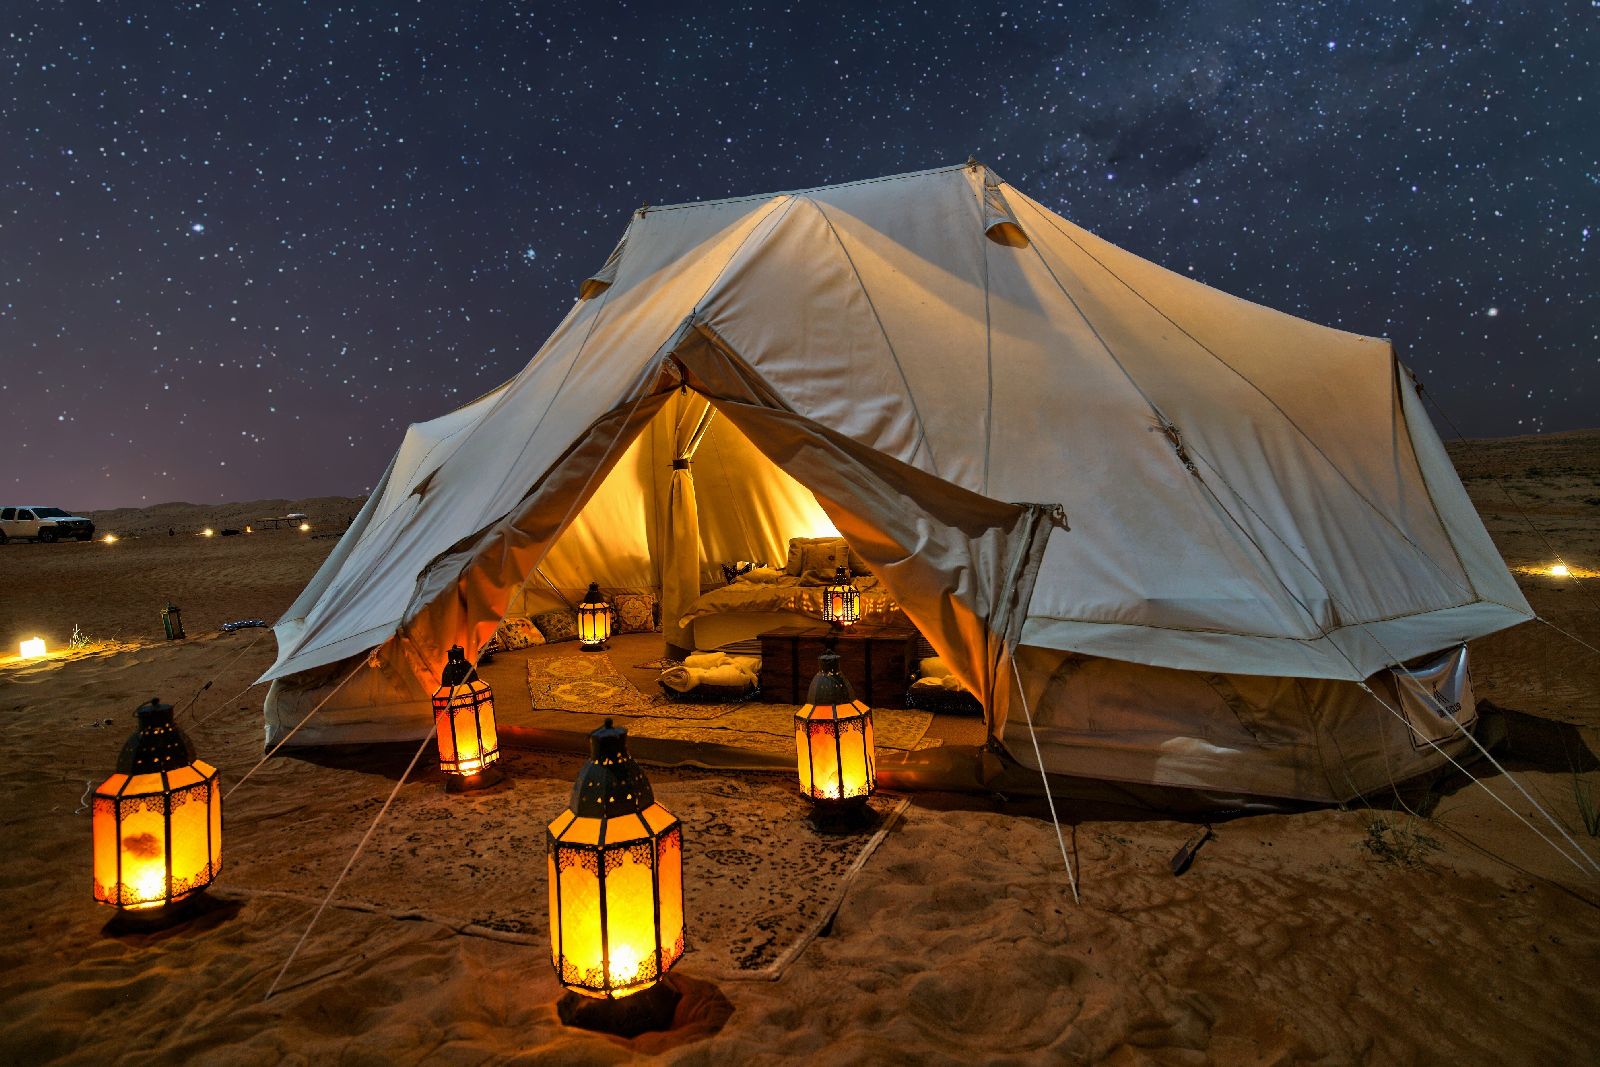 Luxury Bedouin tent at the Canvas Club camp in Oman